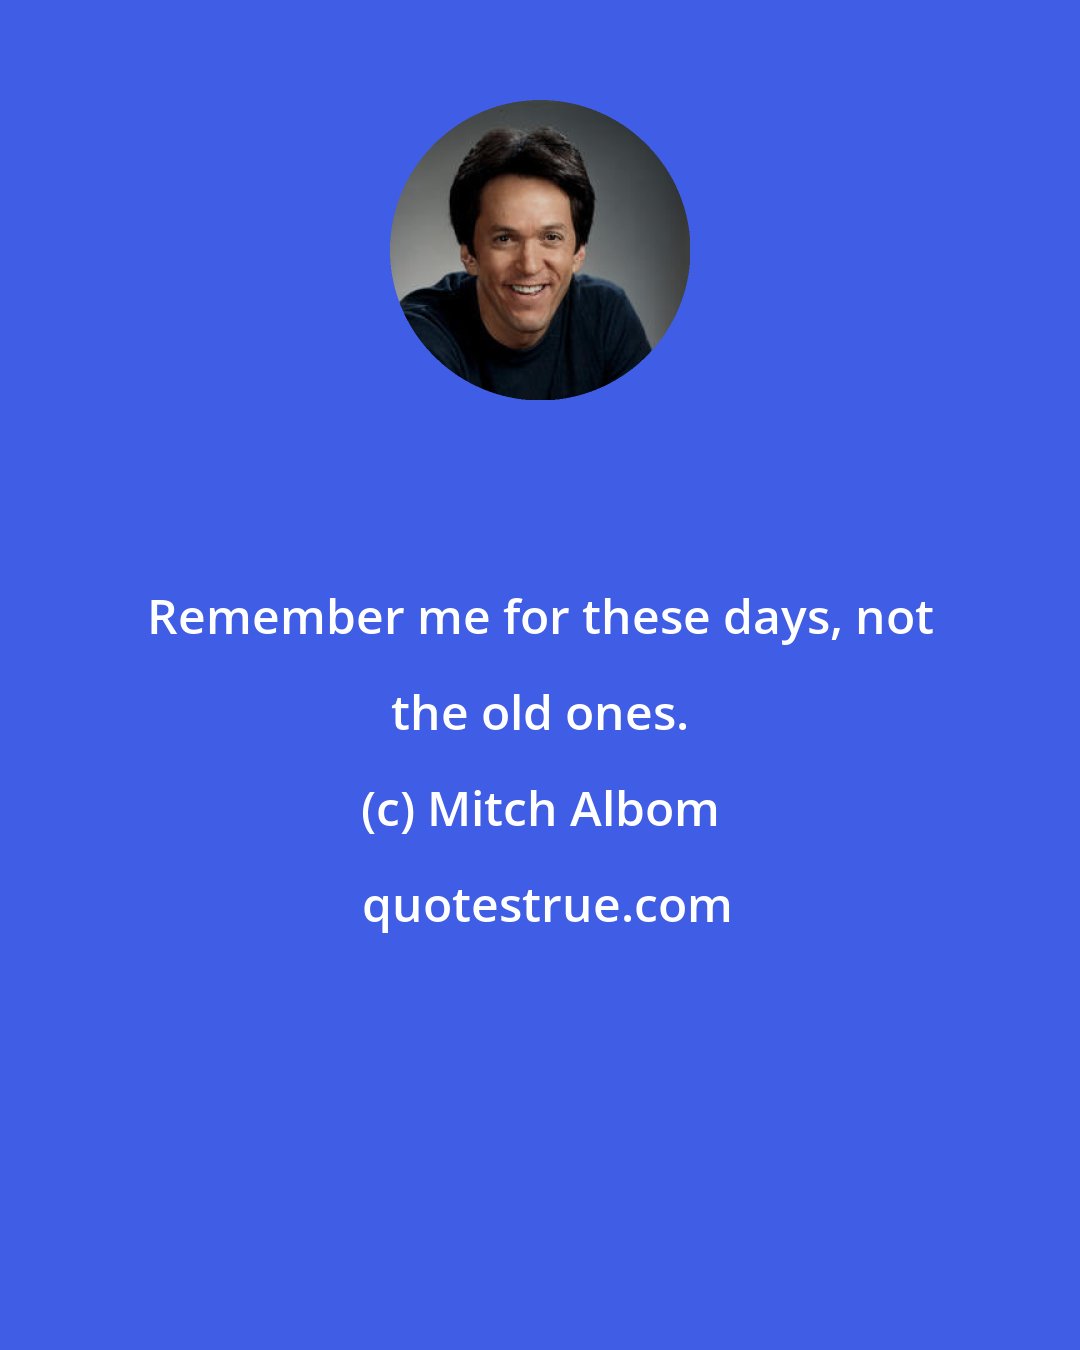 Mitch Albom: Remember me for these days, not the old ones.